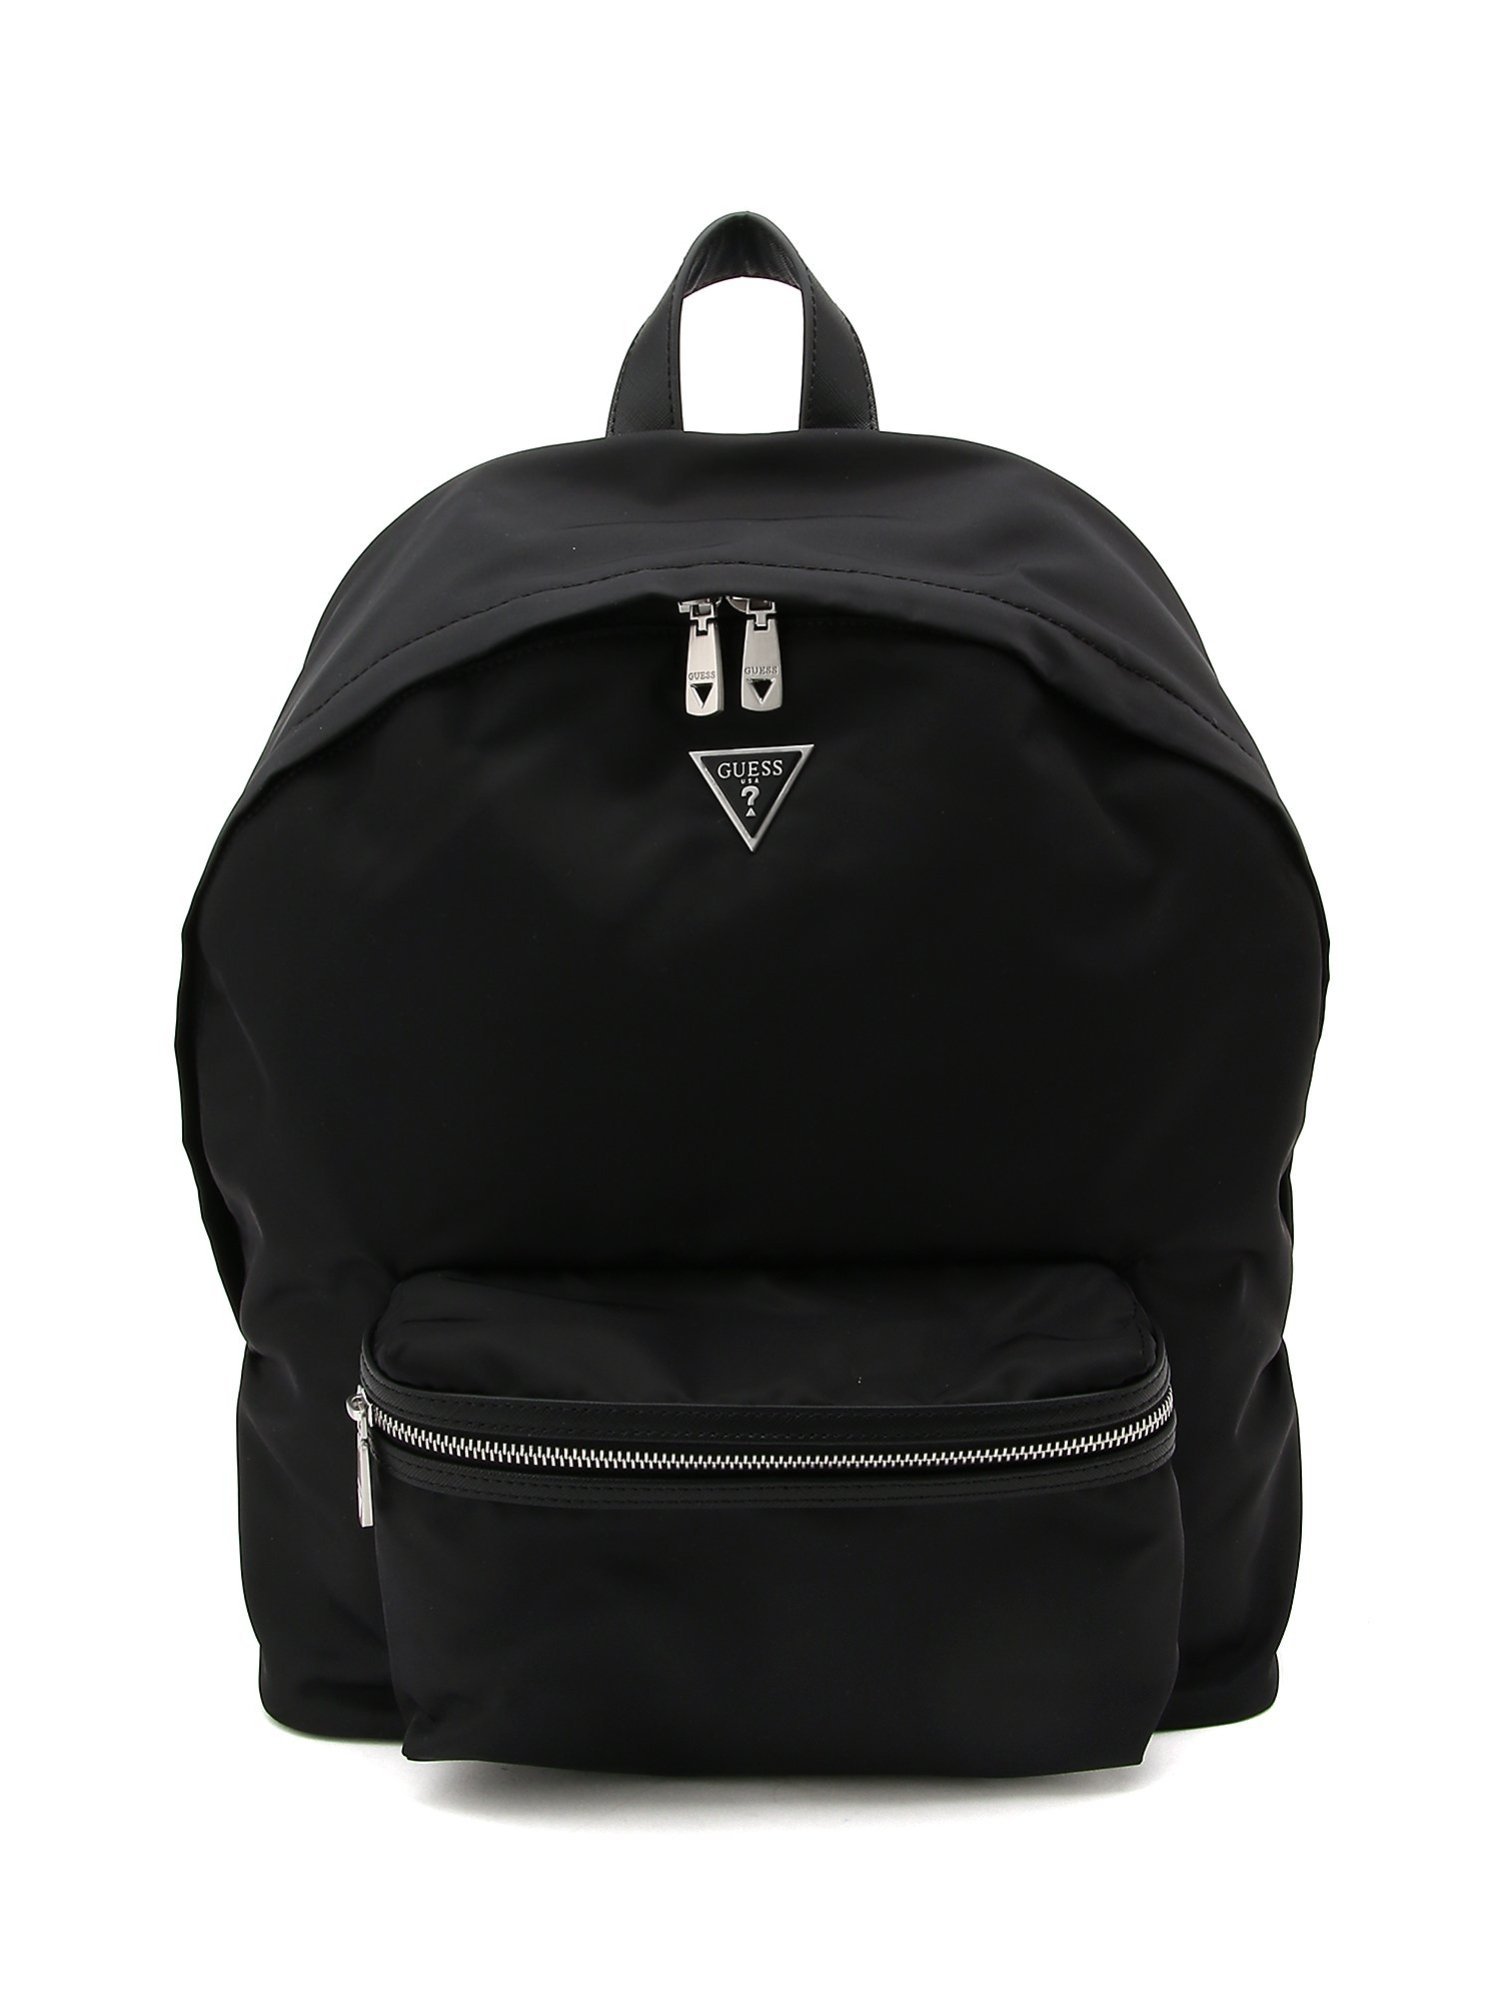 【SALE／30 OFF】GUESS GUESS リュックサック (M)CERTOSA Nylon Smart Backpack ゲス バッグ リュック バックパック ブラック【送料無料】